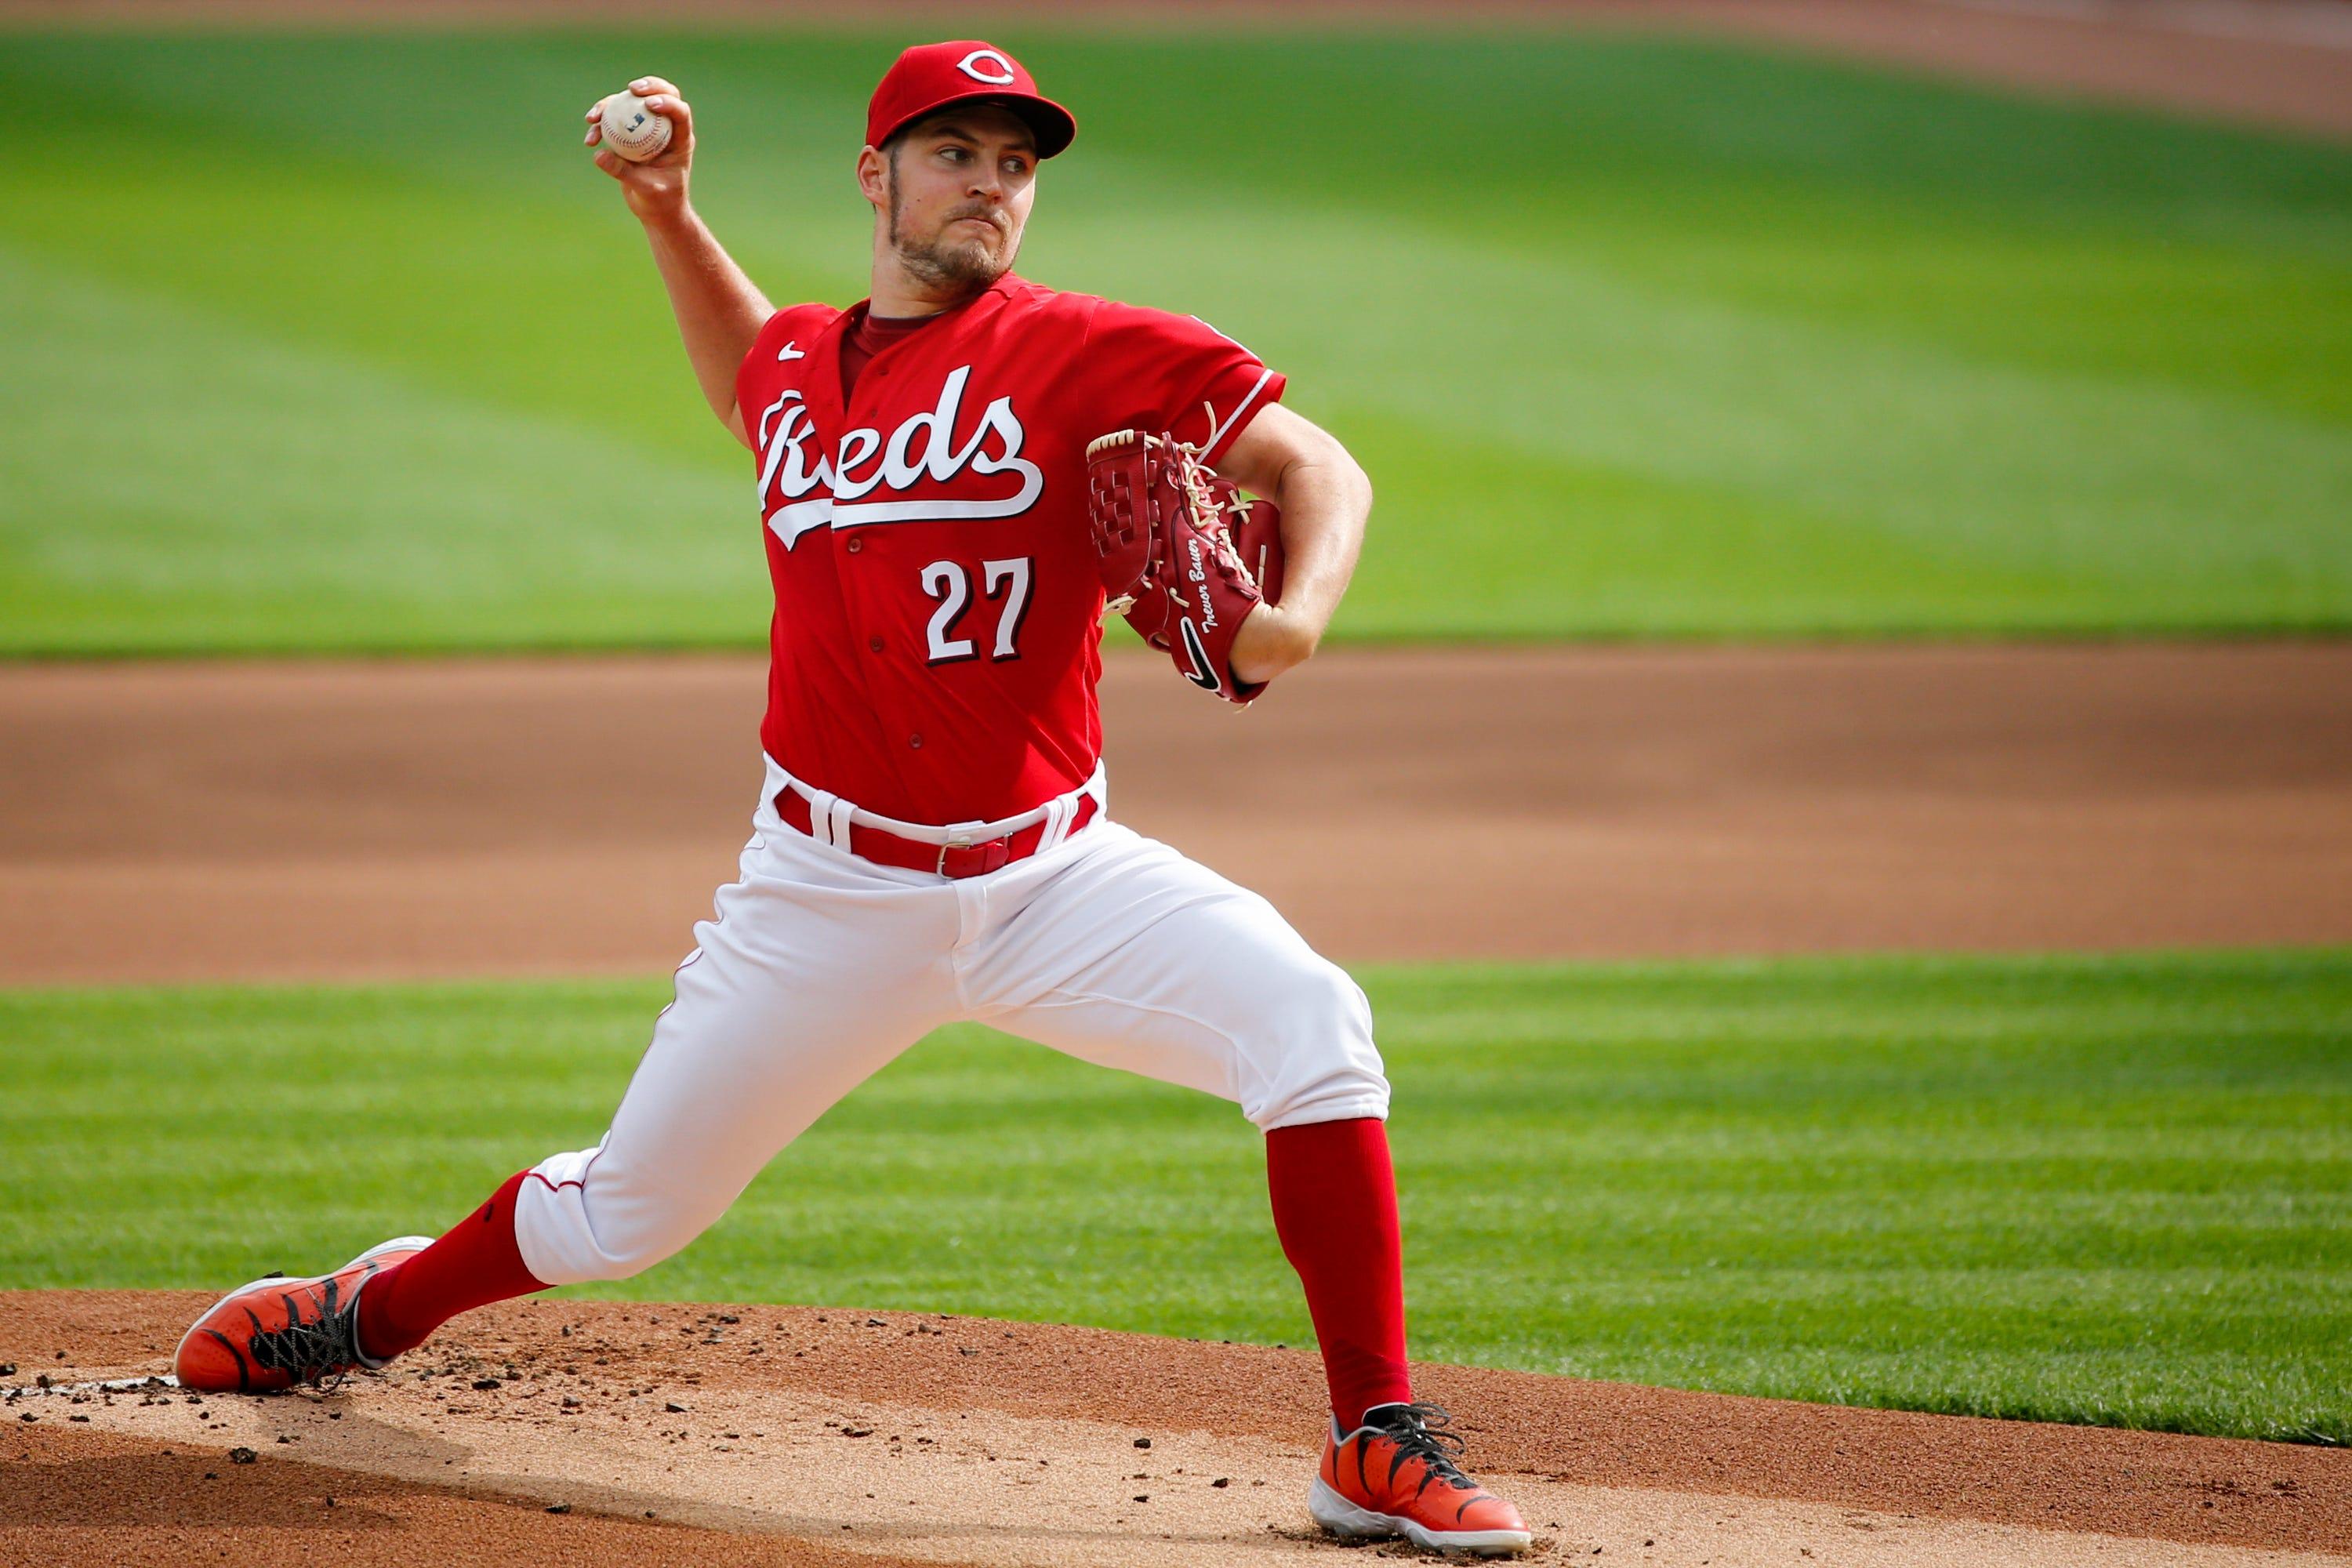 Cincinnati Reds starting pitcher Trevor Bauer (27) delivers the ball in the day baseball game against Pittsburgh Pirates on Monday, Sept. 14, 2020, at Great American Ball Park in Cincinnati. Reds won 3-1. / Meg Vogel via Imagn Content Services, LLC